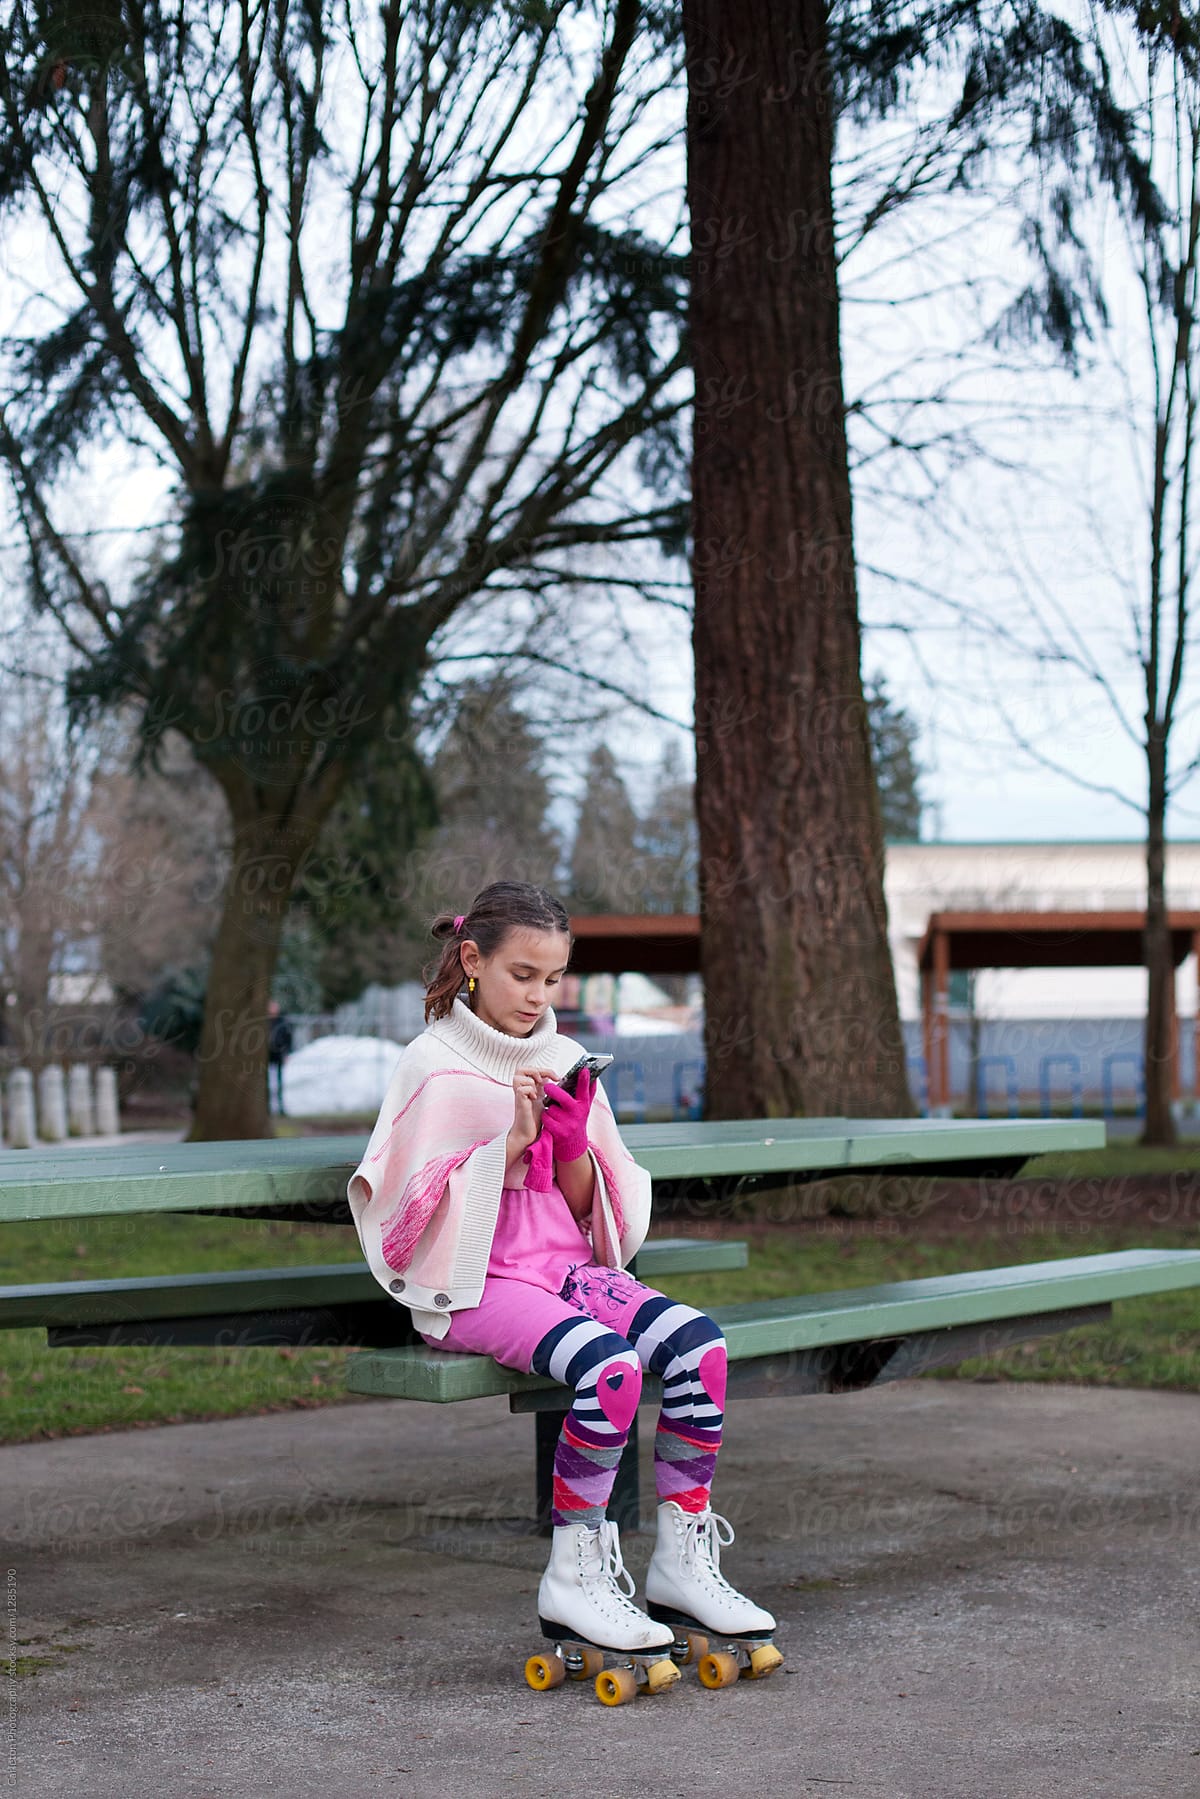 Preteen girl wearing roller skates using smartphone while seated on a picnic table bench in the park